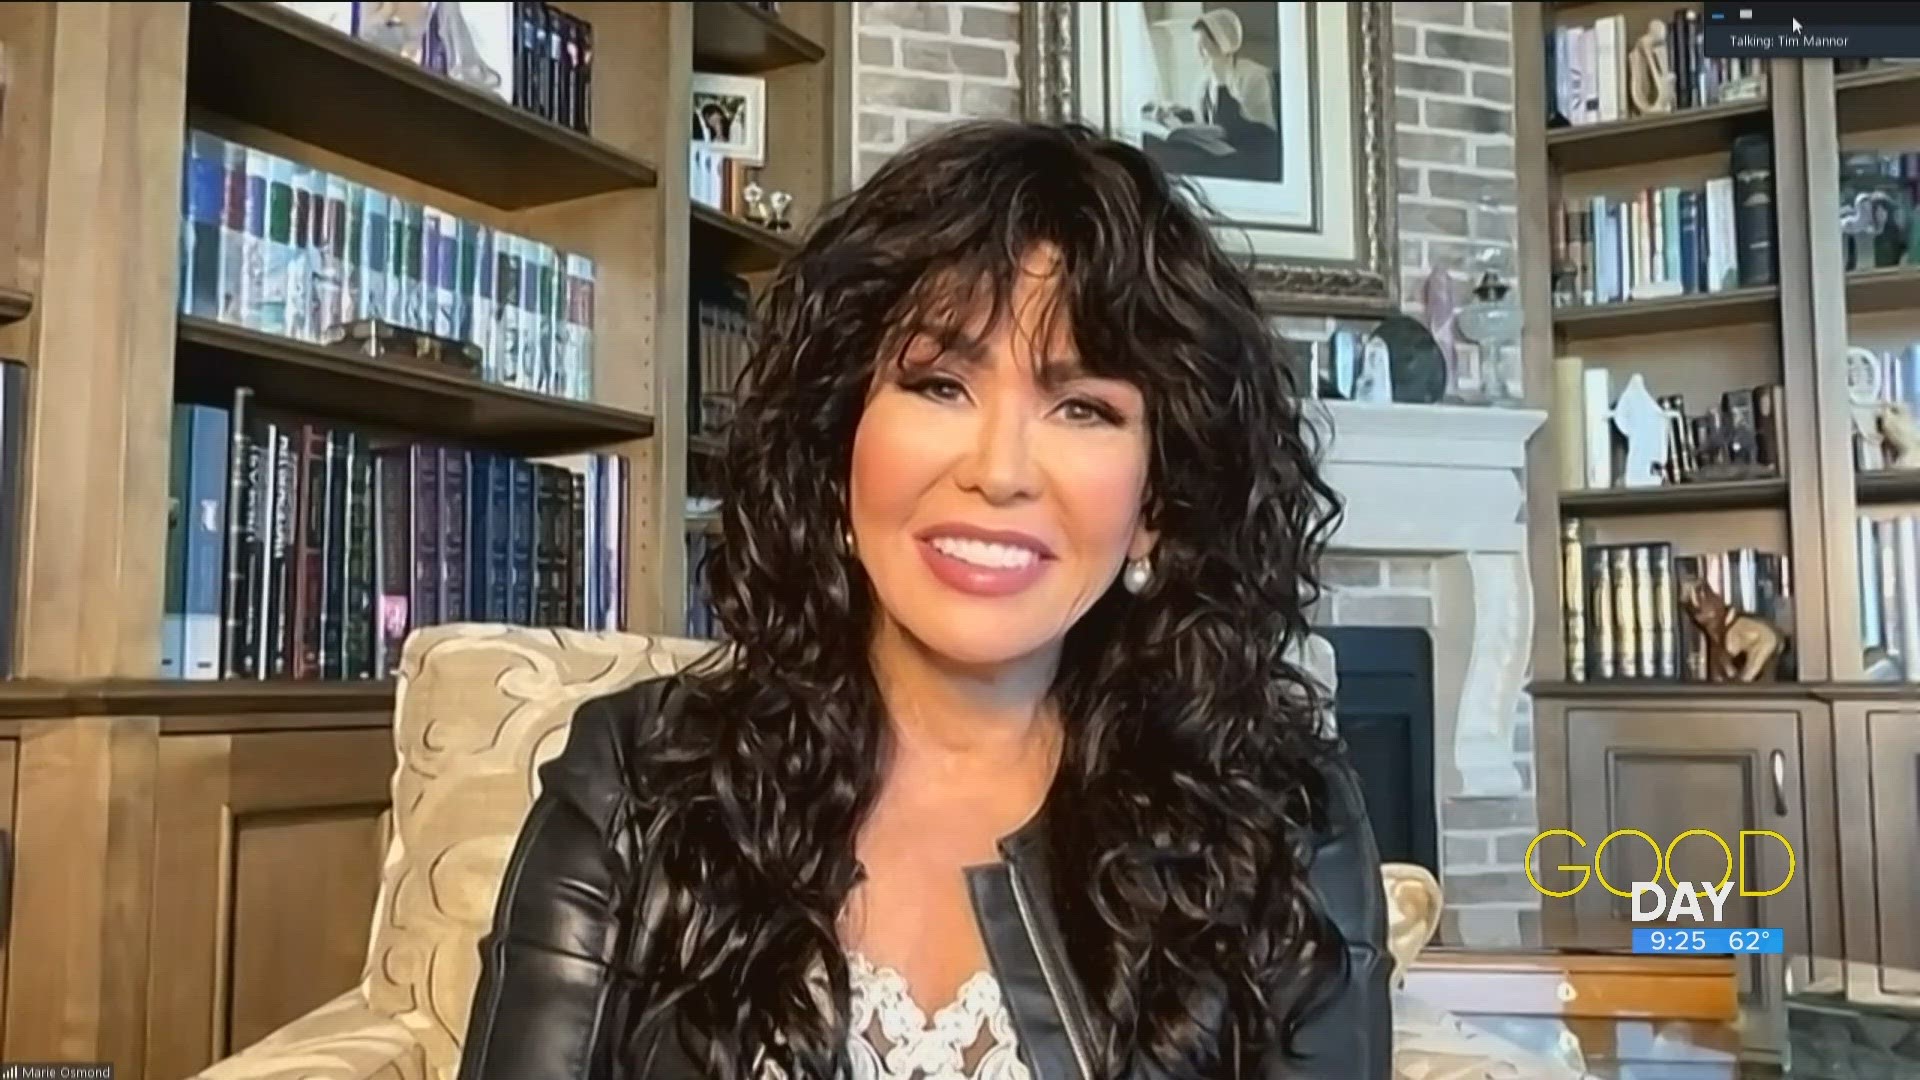 Amanda chats with Marie Osmond ahead of her scheduled performance in Findlay on Sept. 22.